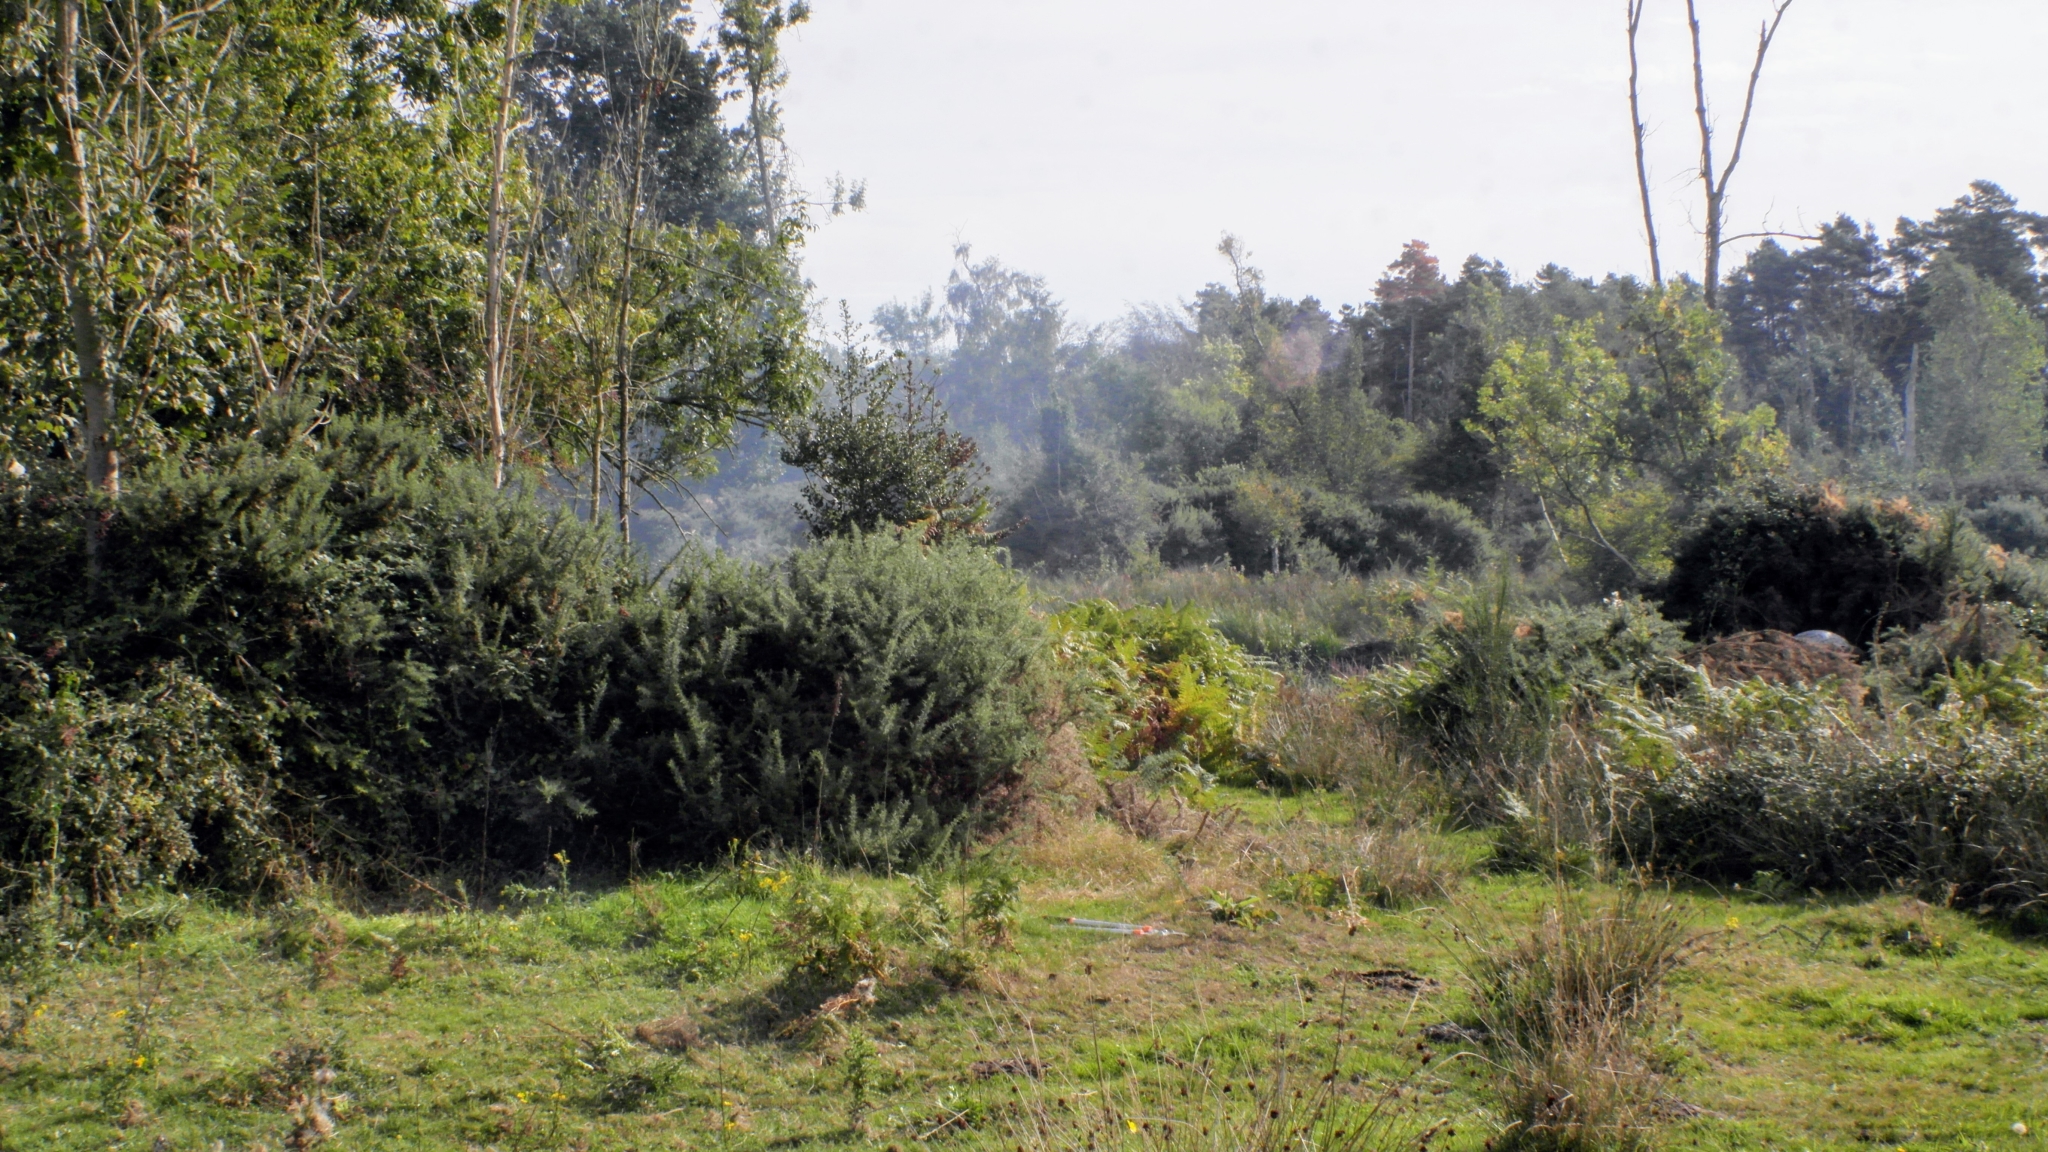 A photo from the FoTF Conservation Event - September 2018 - Gorse Removal at Hockham Hills & Holes